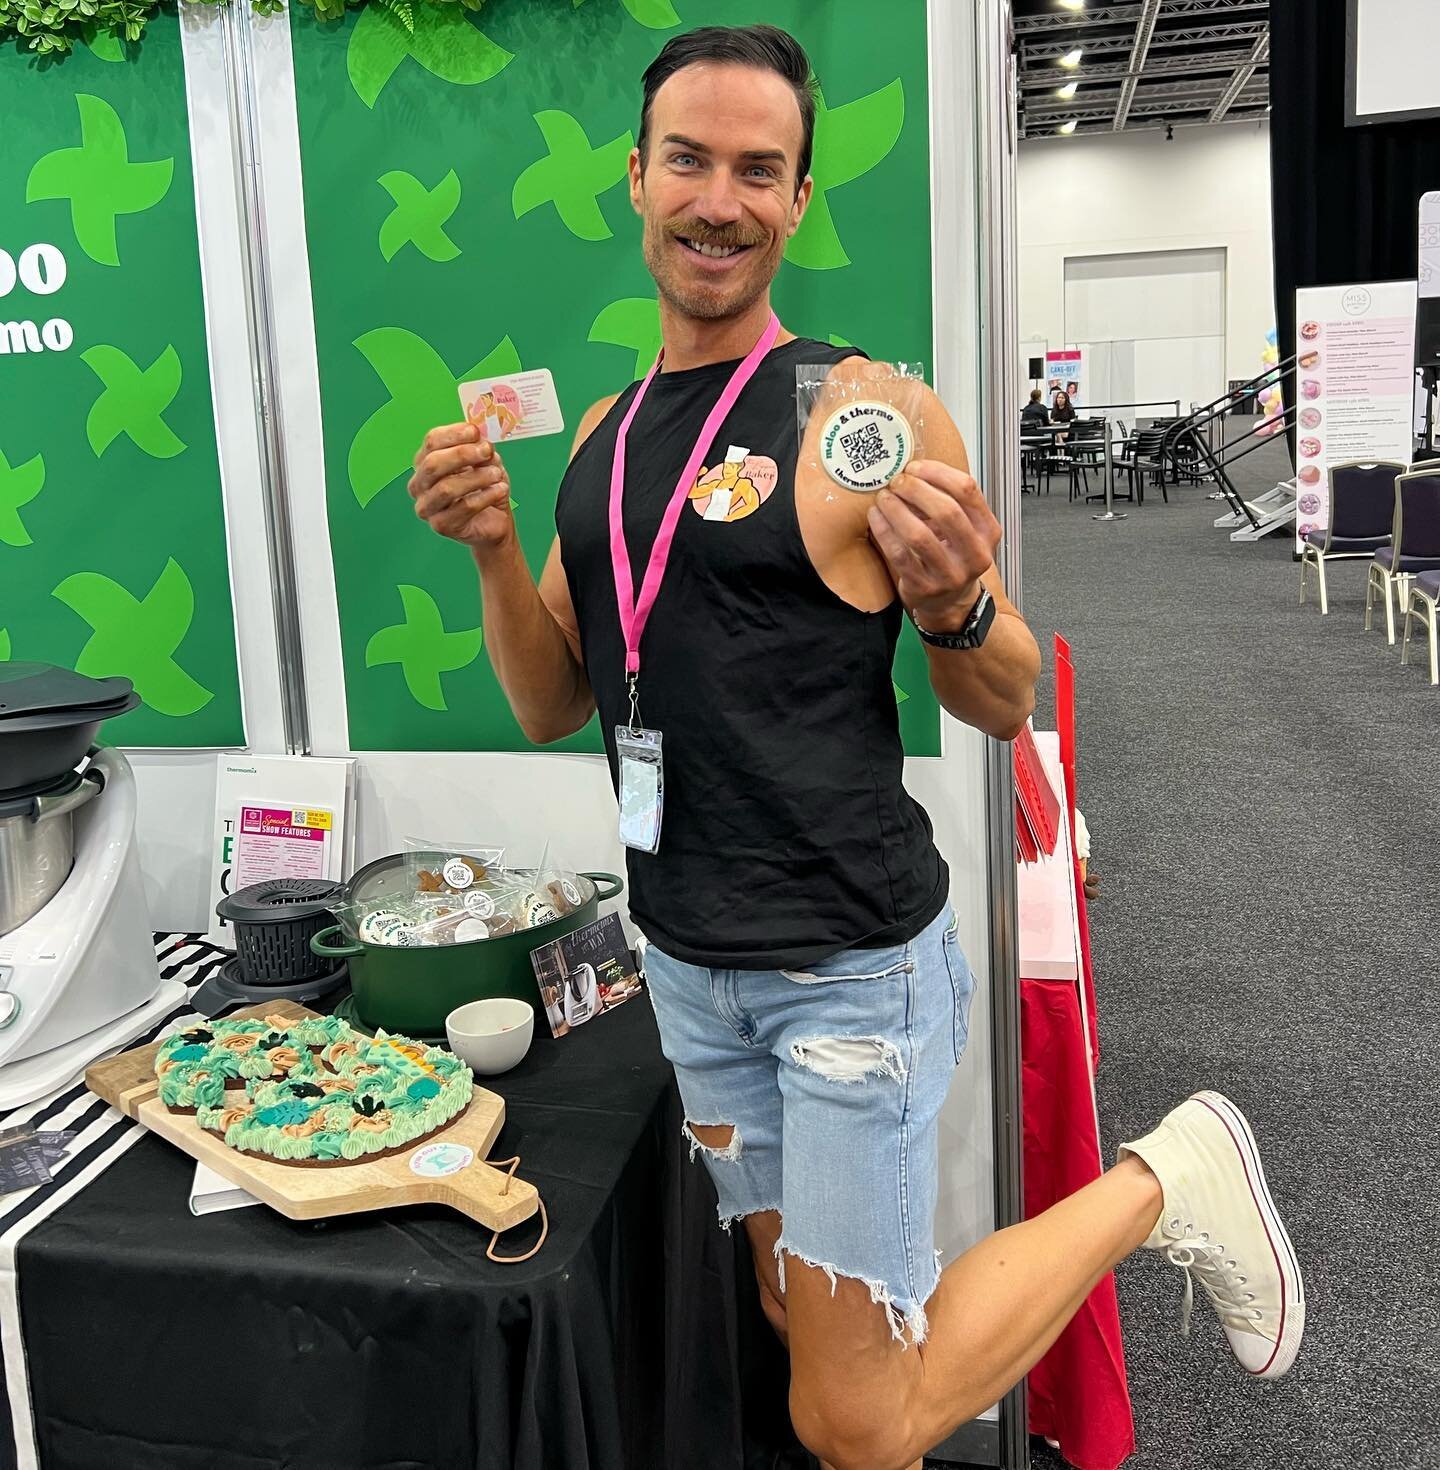 Just another day in the life of me lol being a douche bag and having fun 😂😂.. be sure to pop to the @melooandthermo stall at the international cake show over the weekend! The Fab Dee from @flyinoutdelights has her groovy new cake templates and if y